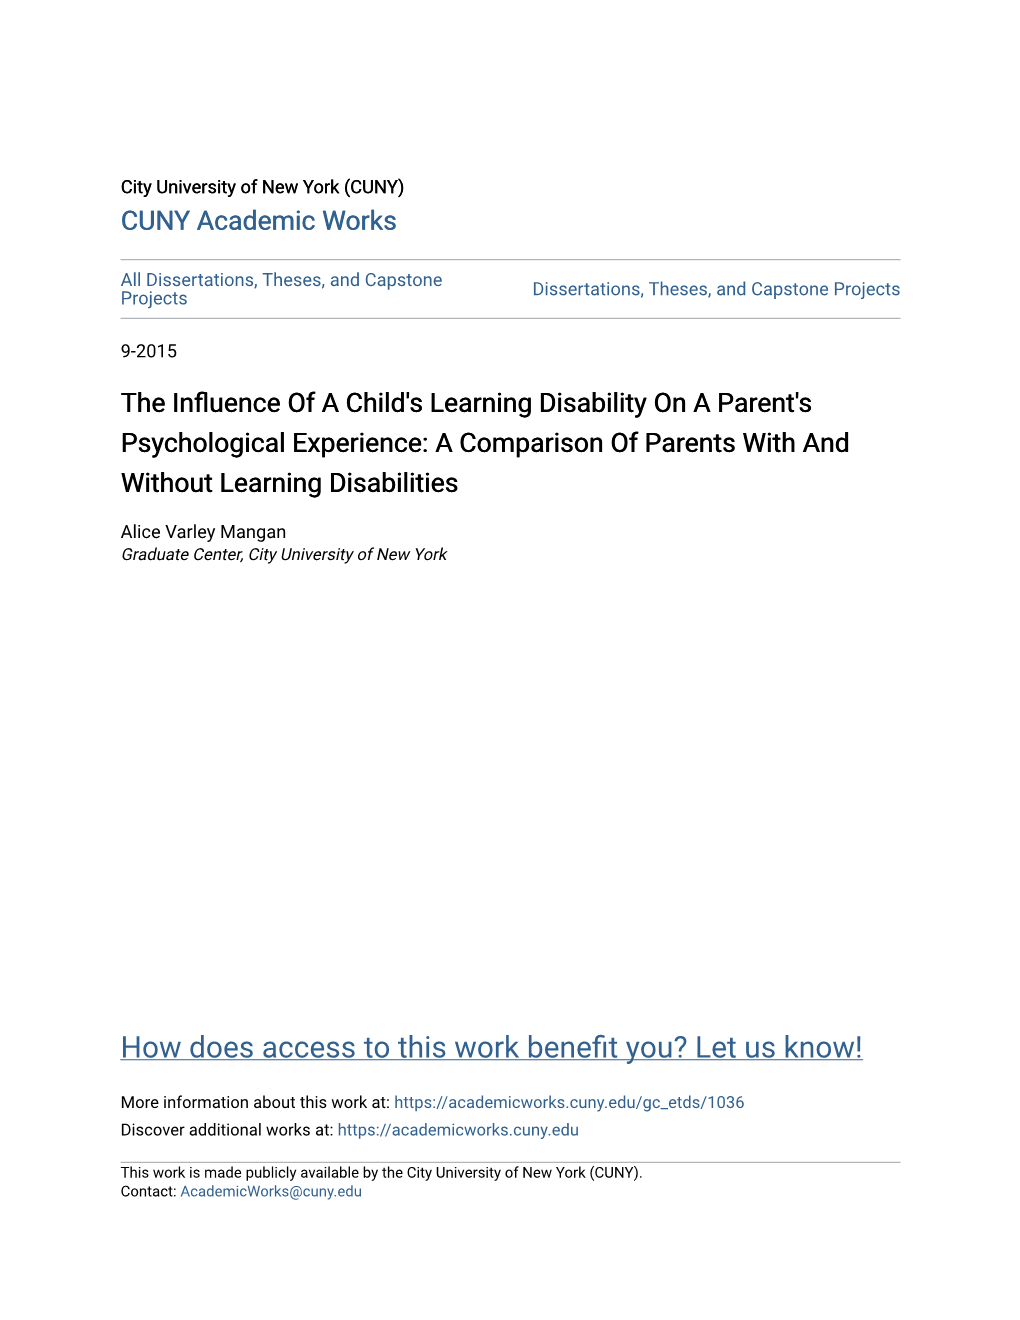 The Influence of a Child's Learning Disability on a Parent's Psychological Experience: a Comparison of Parents with and Without Learning Disabilities